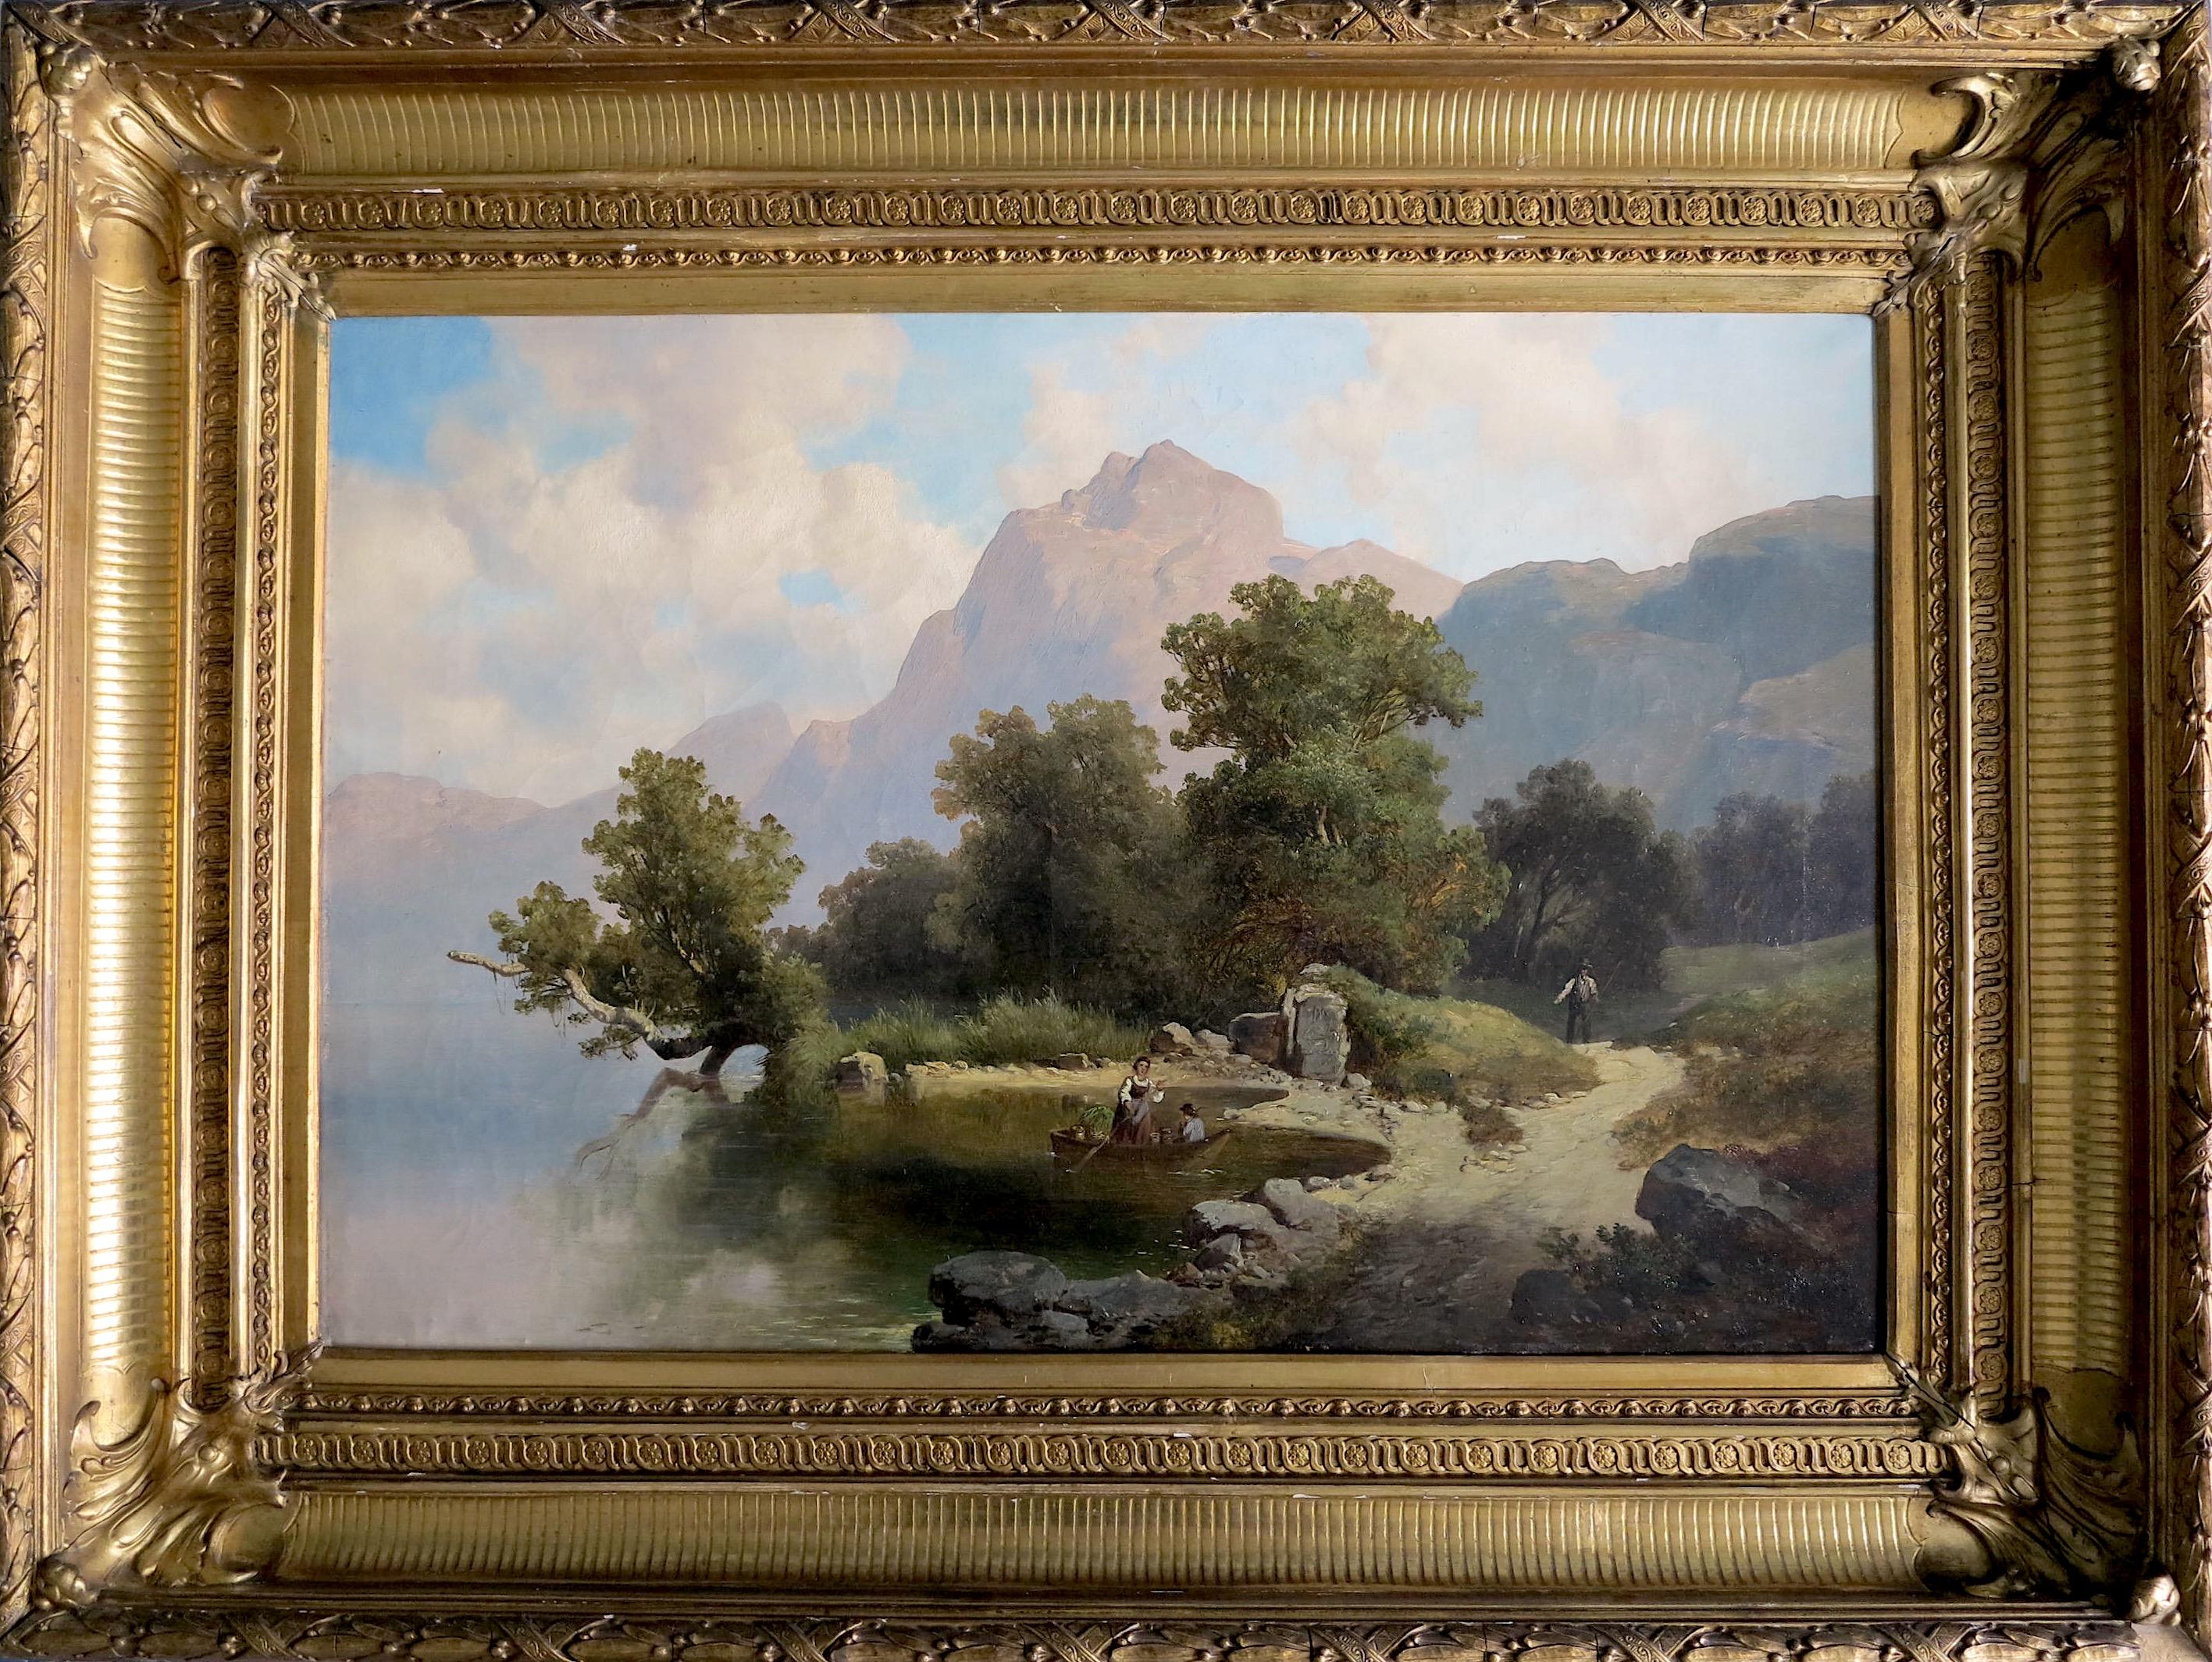 Josef THOMA Landscape Painting - On the shores of a lake in the Austrian Alps